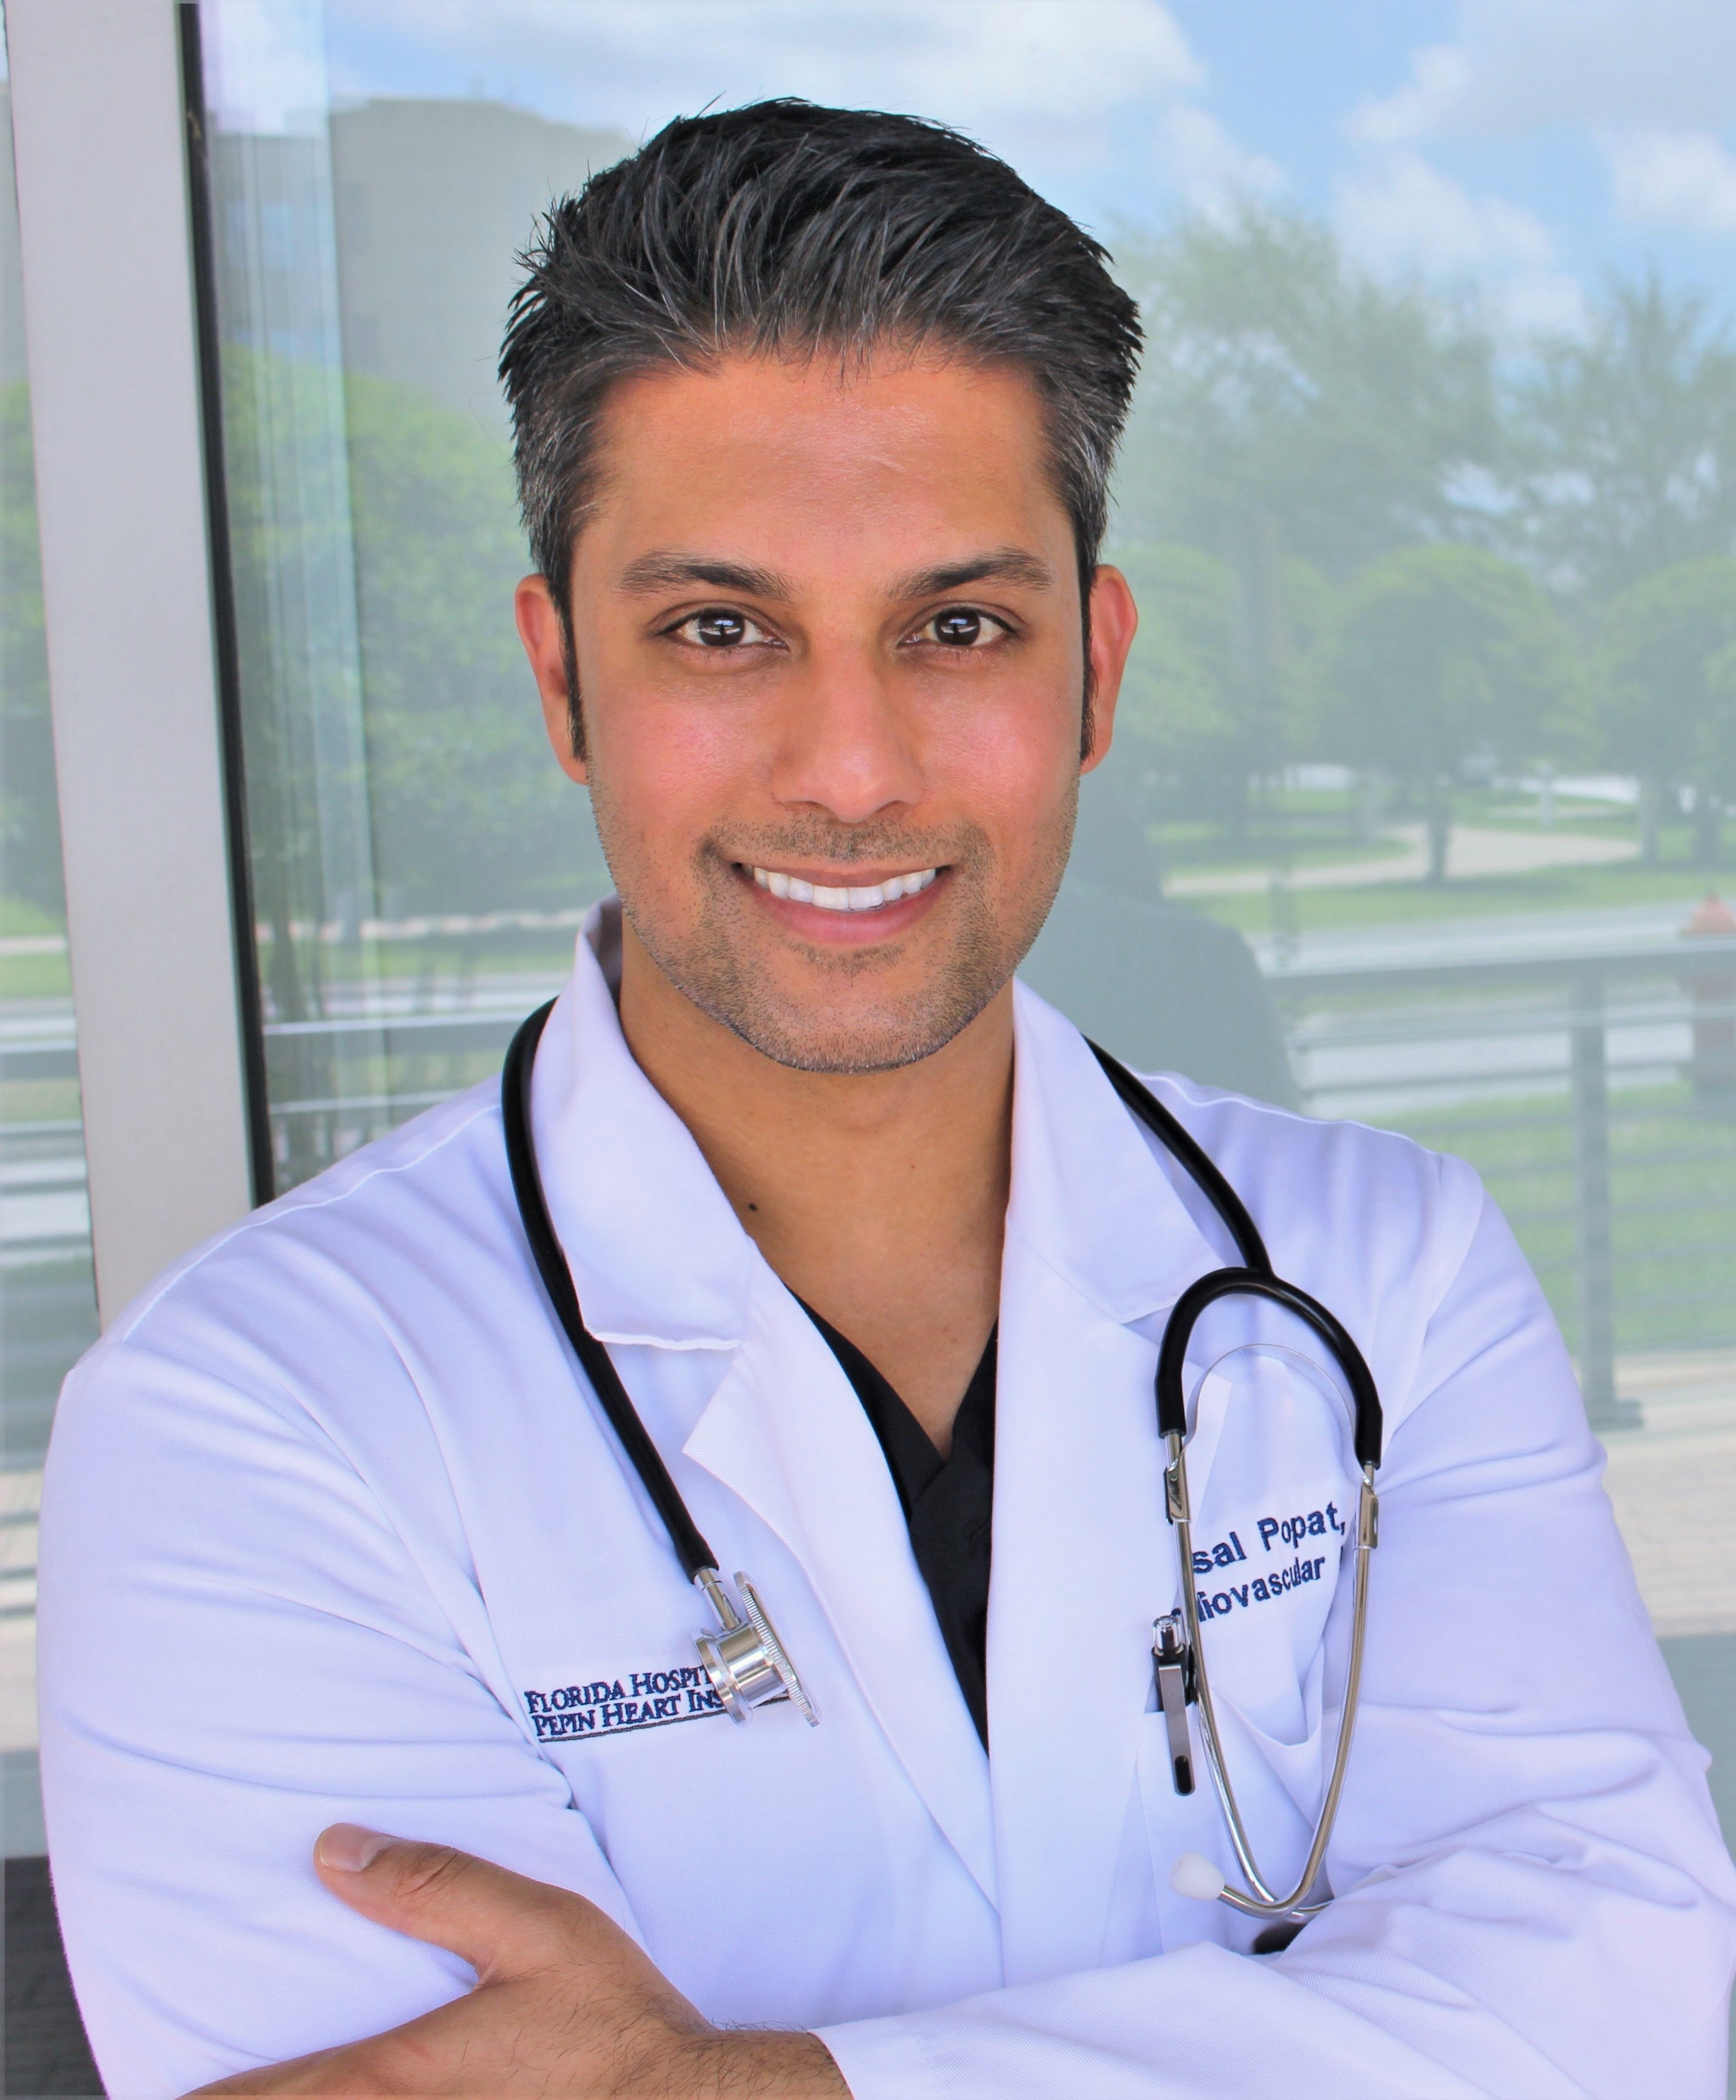 Jesal V. Popat, M.D., FACC, Voted a Top Cardiologist by Tampa Magazine